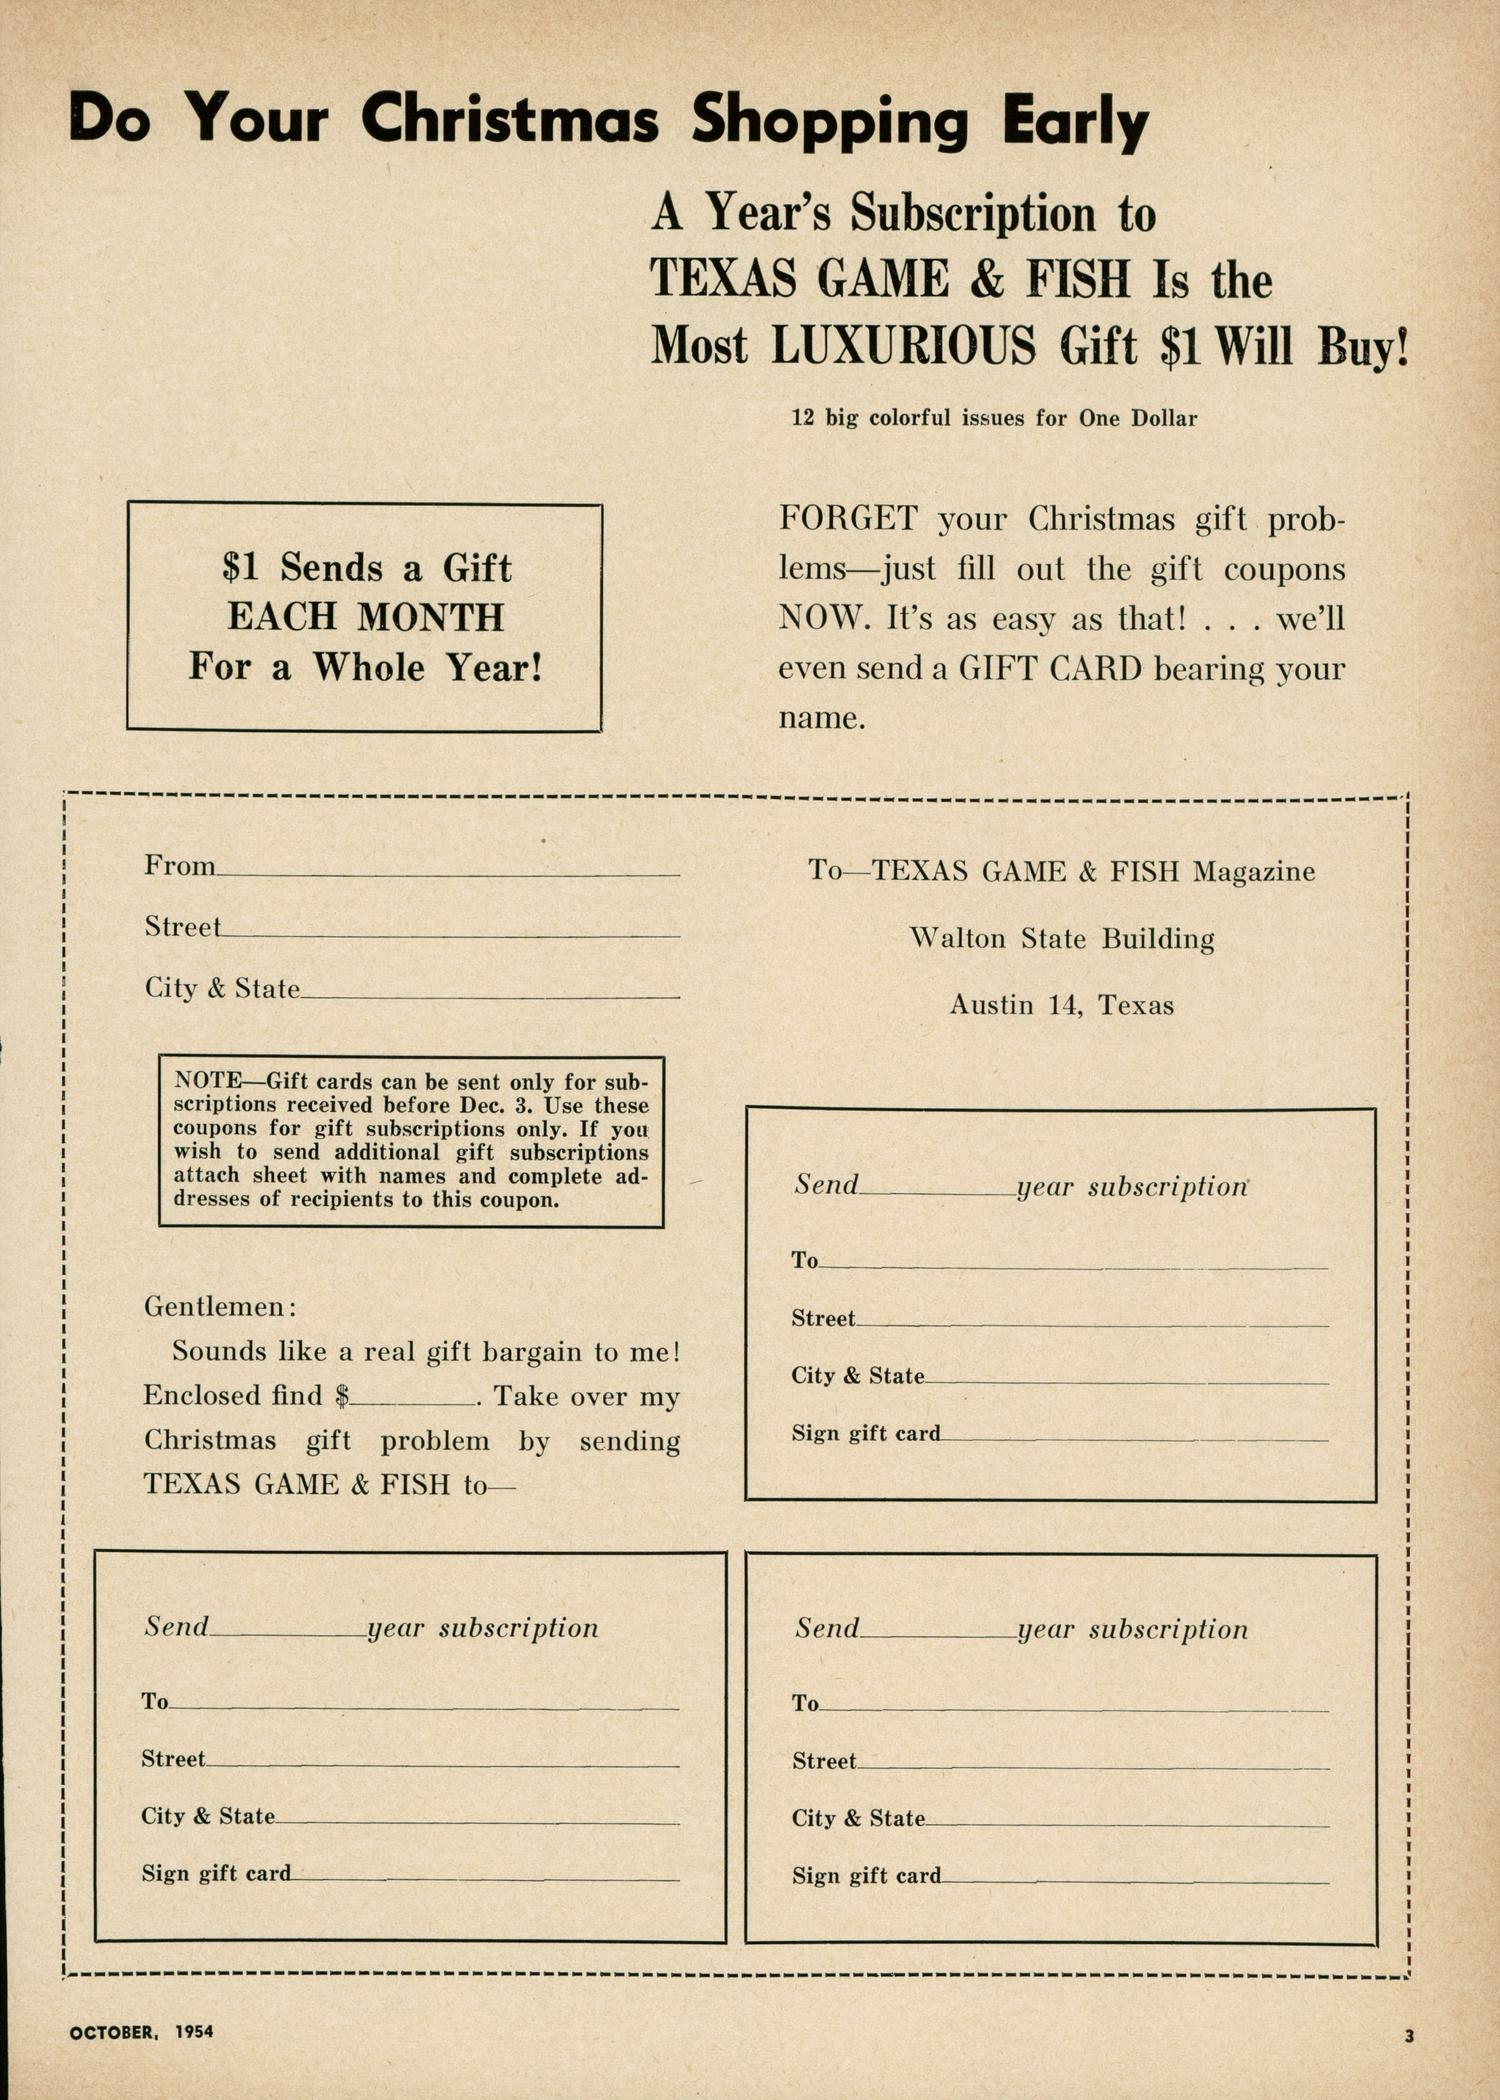 Texas Game and Fish, Volume 12, Number 11, October 1954
                                                
                                                    3
                                                